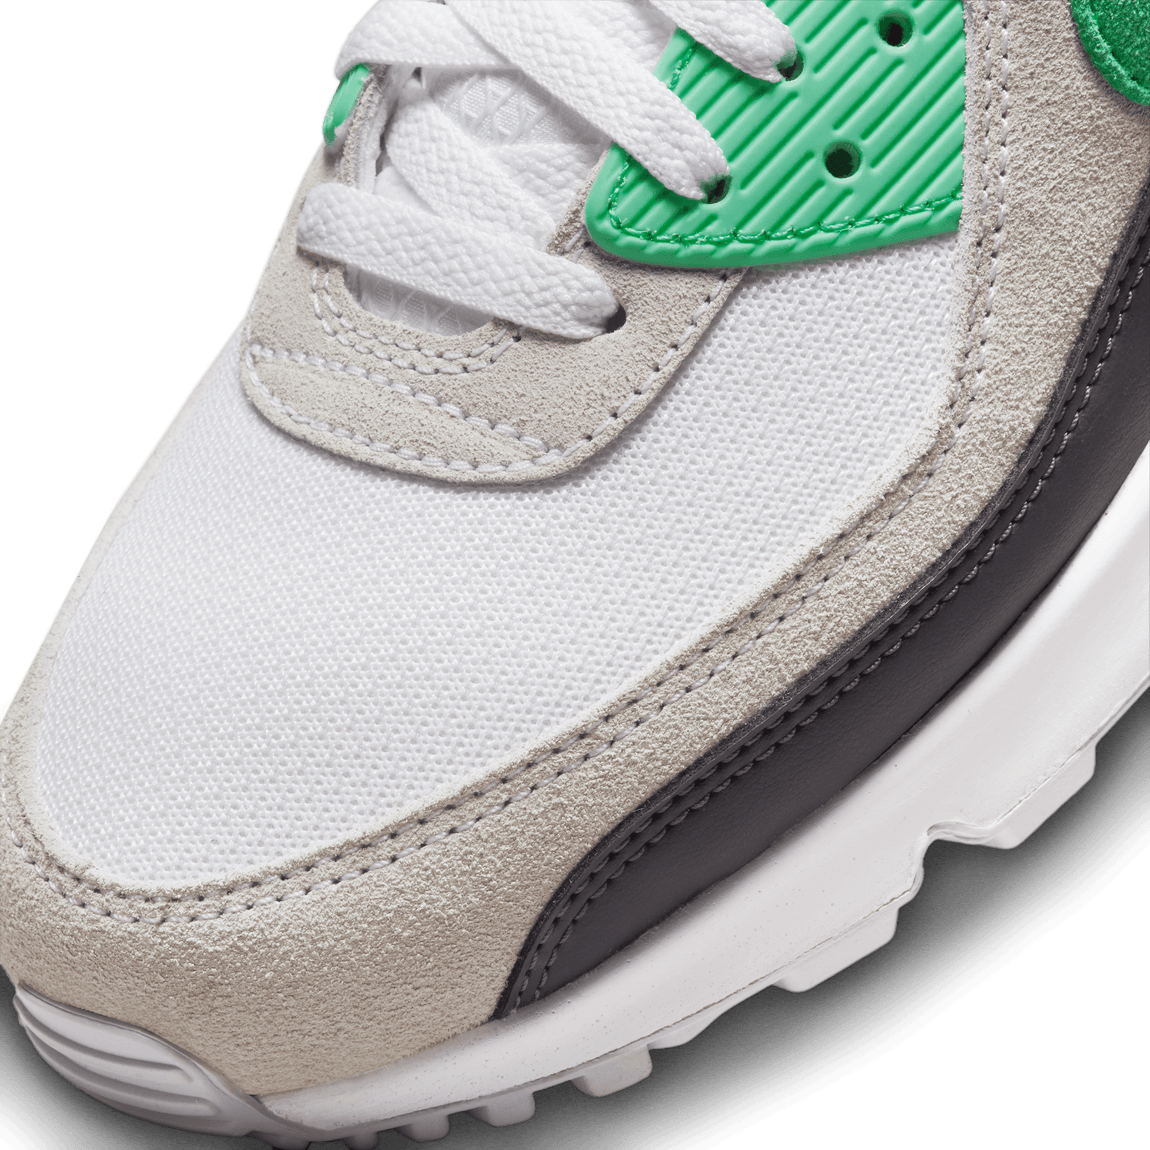 Nike Air Max 90 (White/Spring Green/Anthracite) - Nike Air Max 90 (White/Spring Green/Anthracite) - 